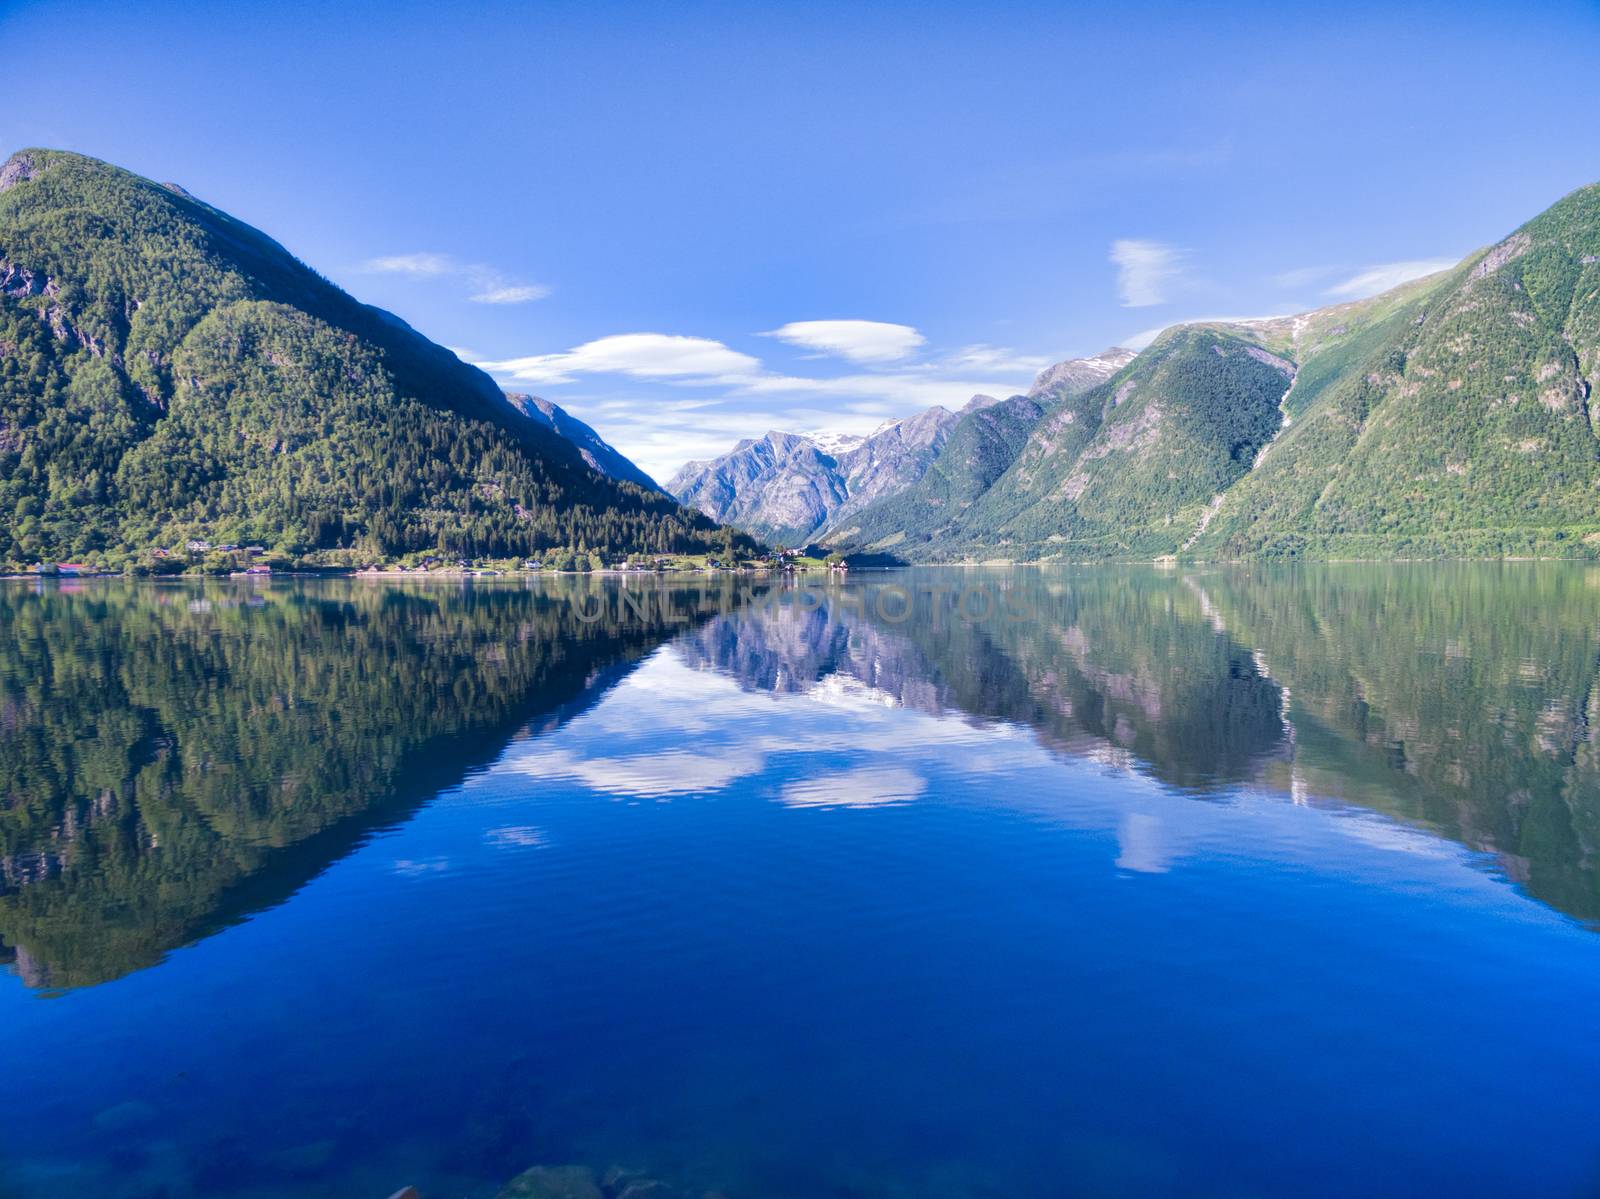 Fjord in Norway by Harvepino